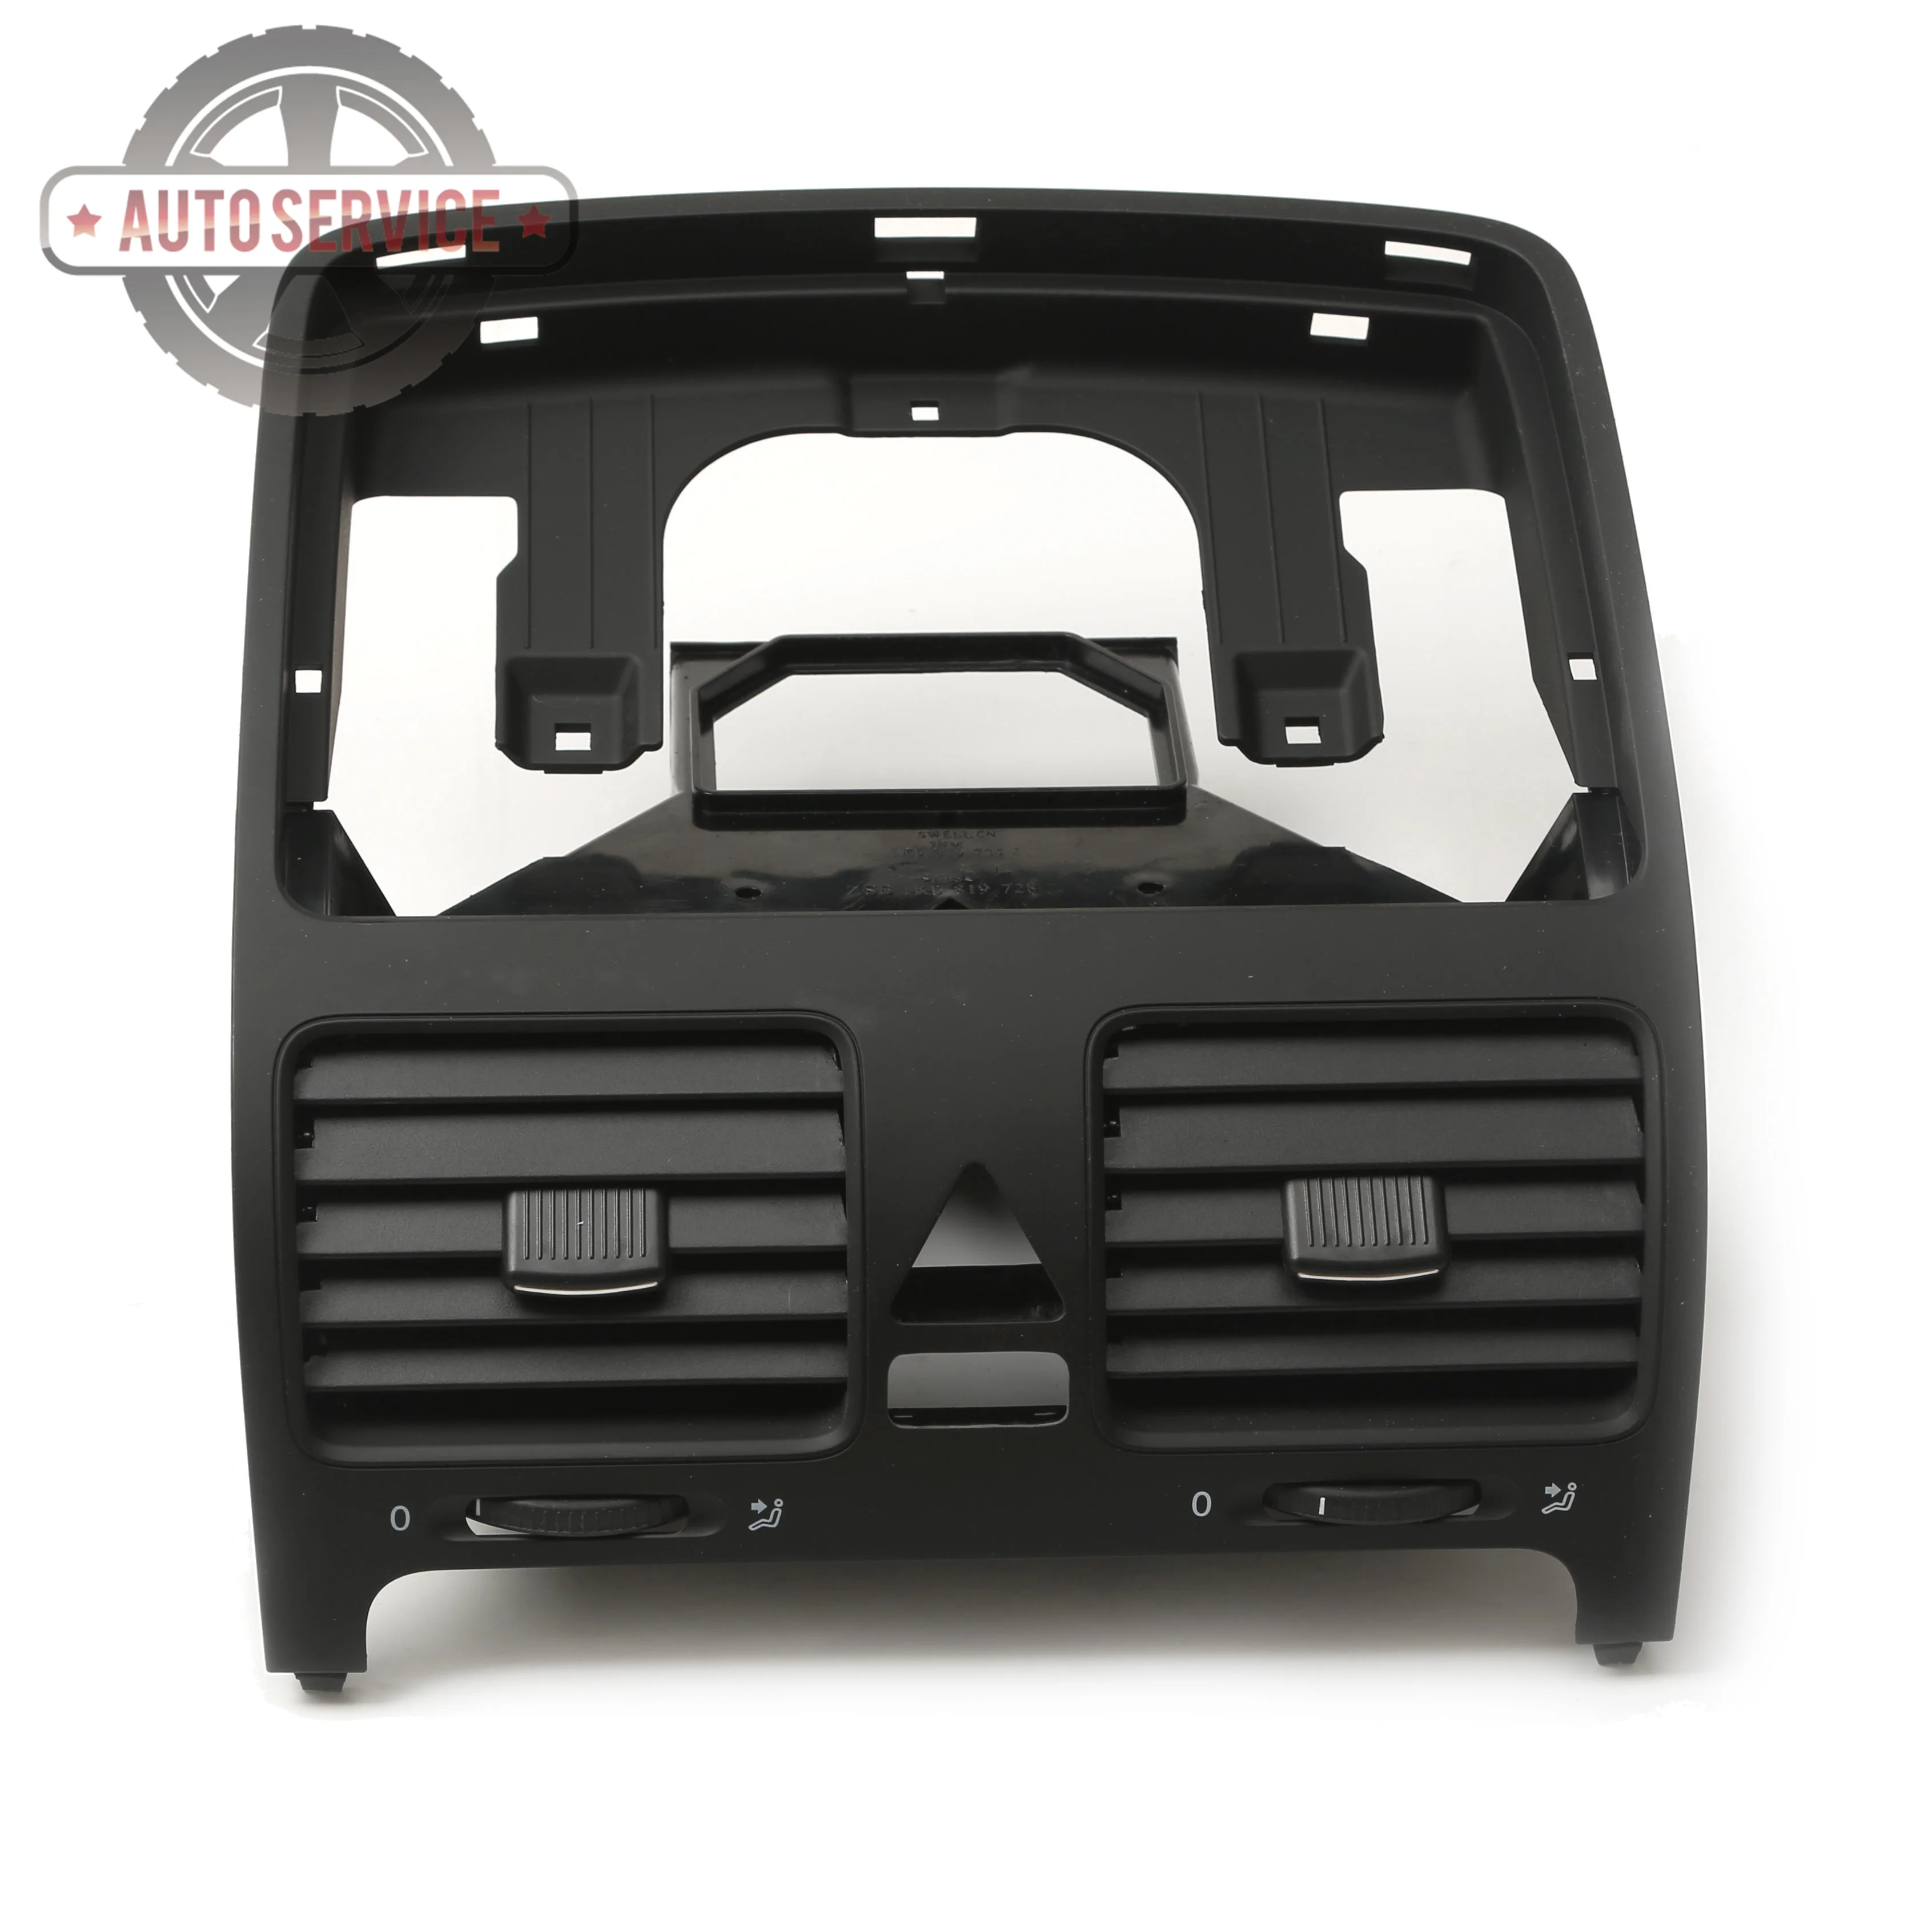 NEW 1K0 819 728 E Front Dashboard Air Outlet Dash A/C Central Vent For VW Volkswagen Jetta Golf /GTI  MK5 Rabbit 1K0819743B